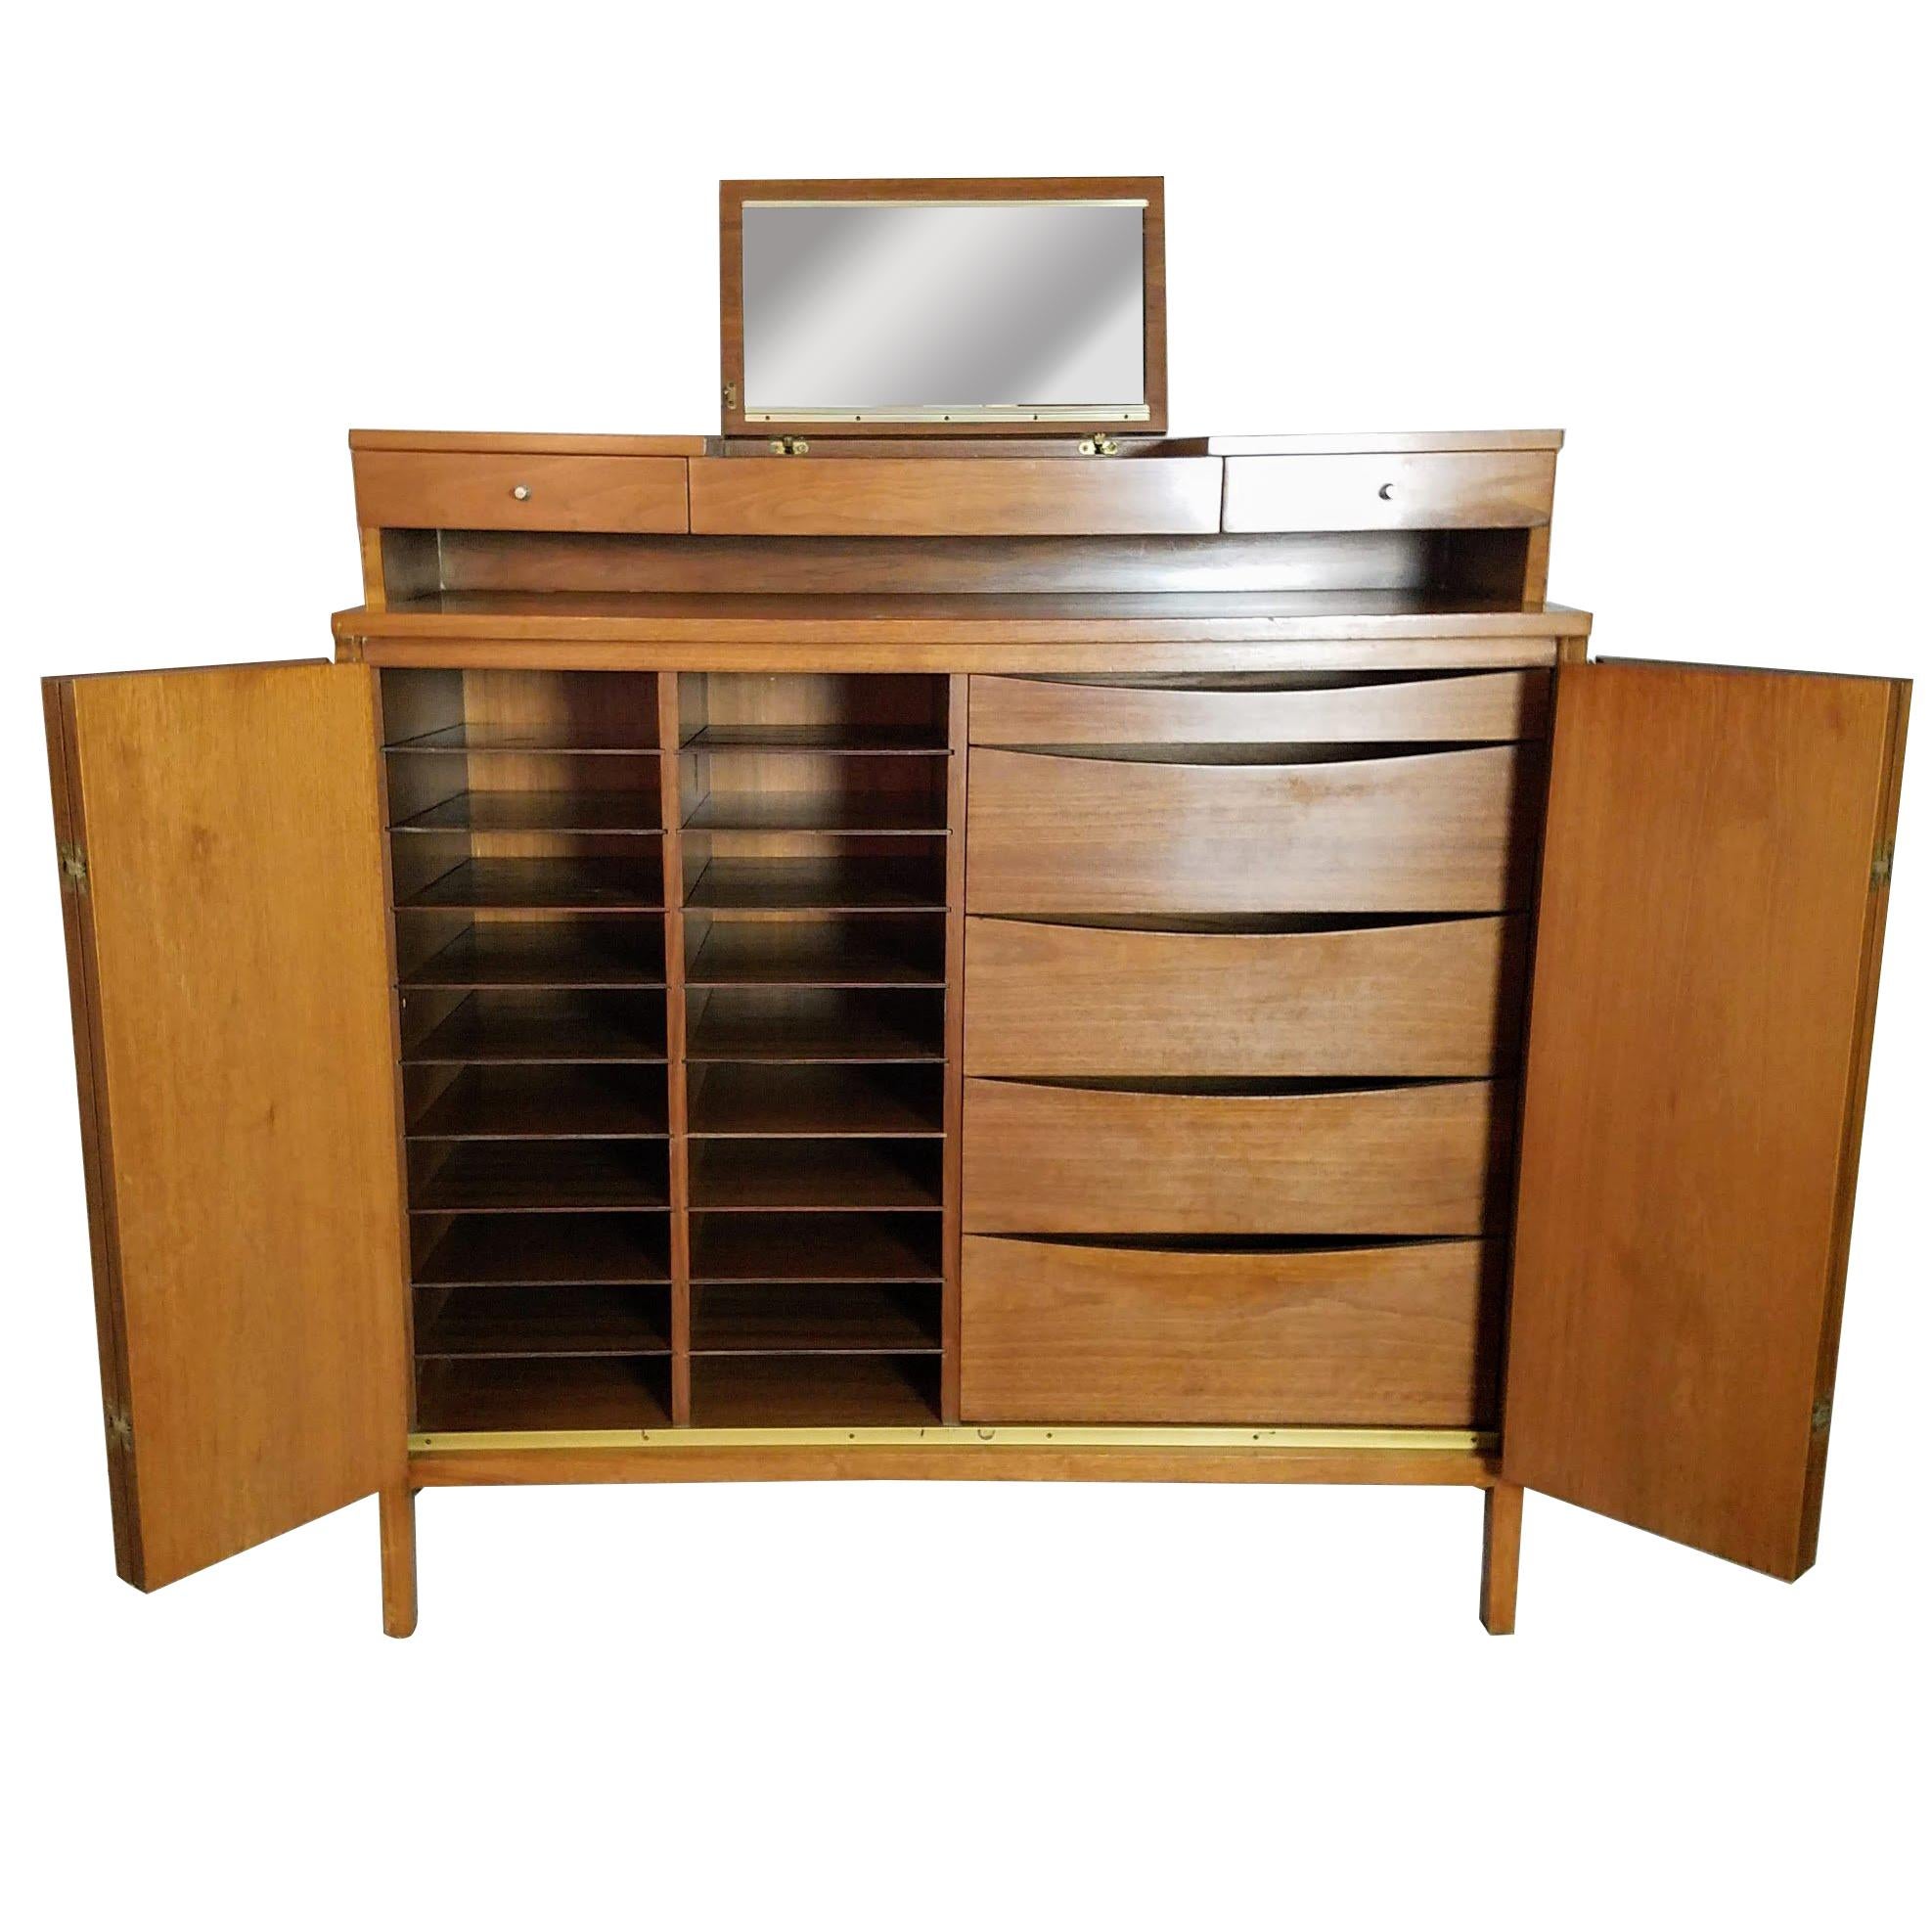 Paul McCobb's gentleman's walnut chest with a fold down mirror Irwin line for Calvin.
The accordion doors are bookmatched veneer opening to 18 shirt shelves and five graduated drawers.
The chest is in very good vintage condition with wear